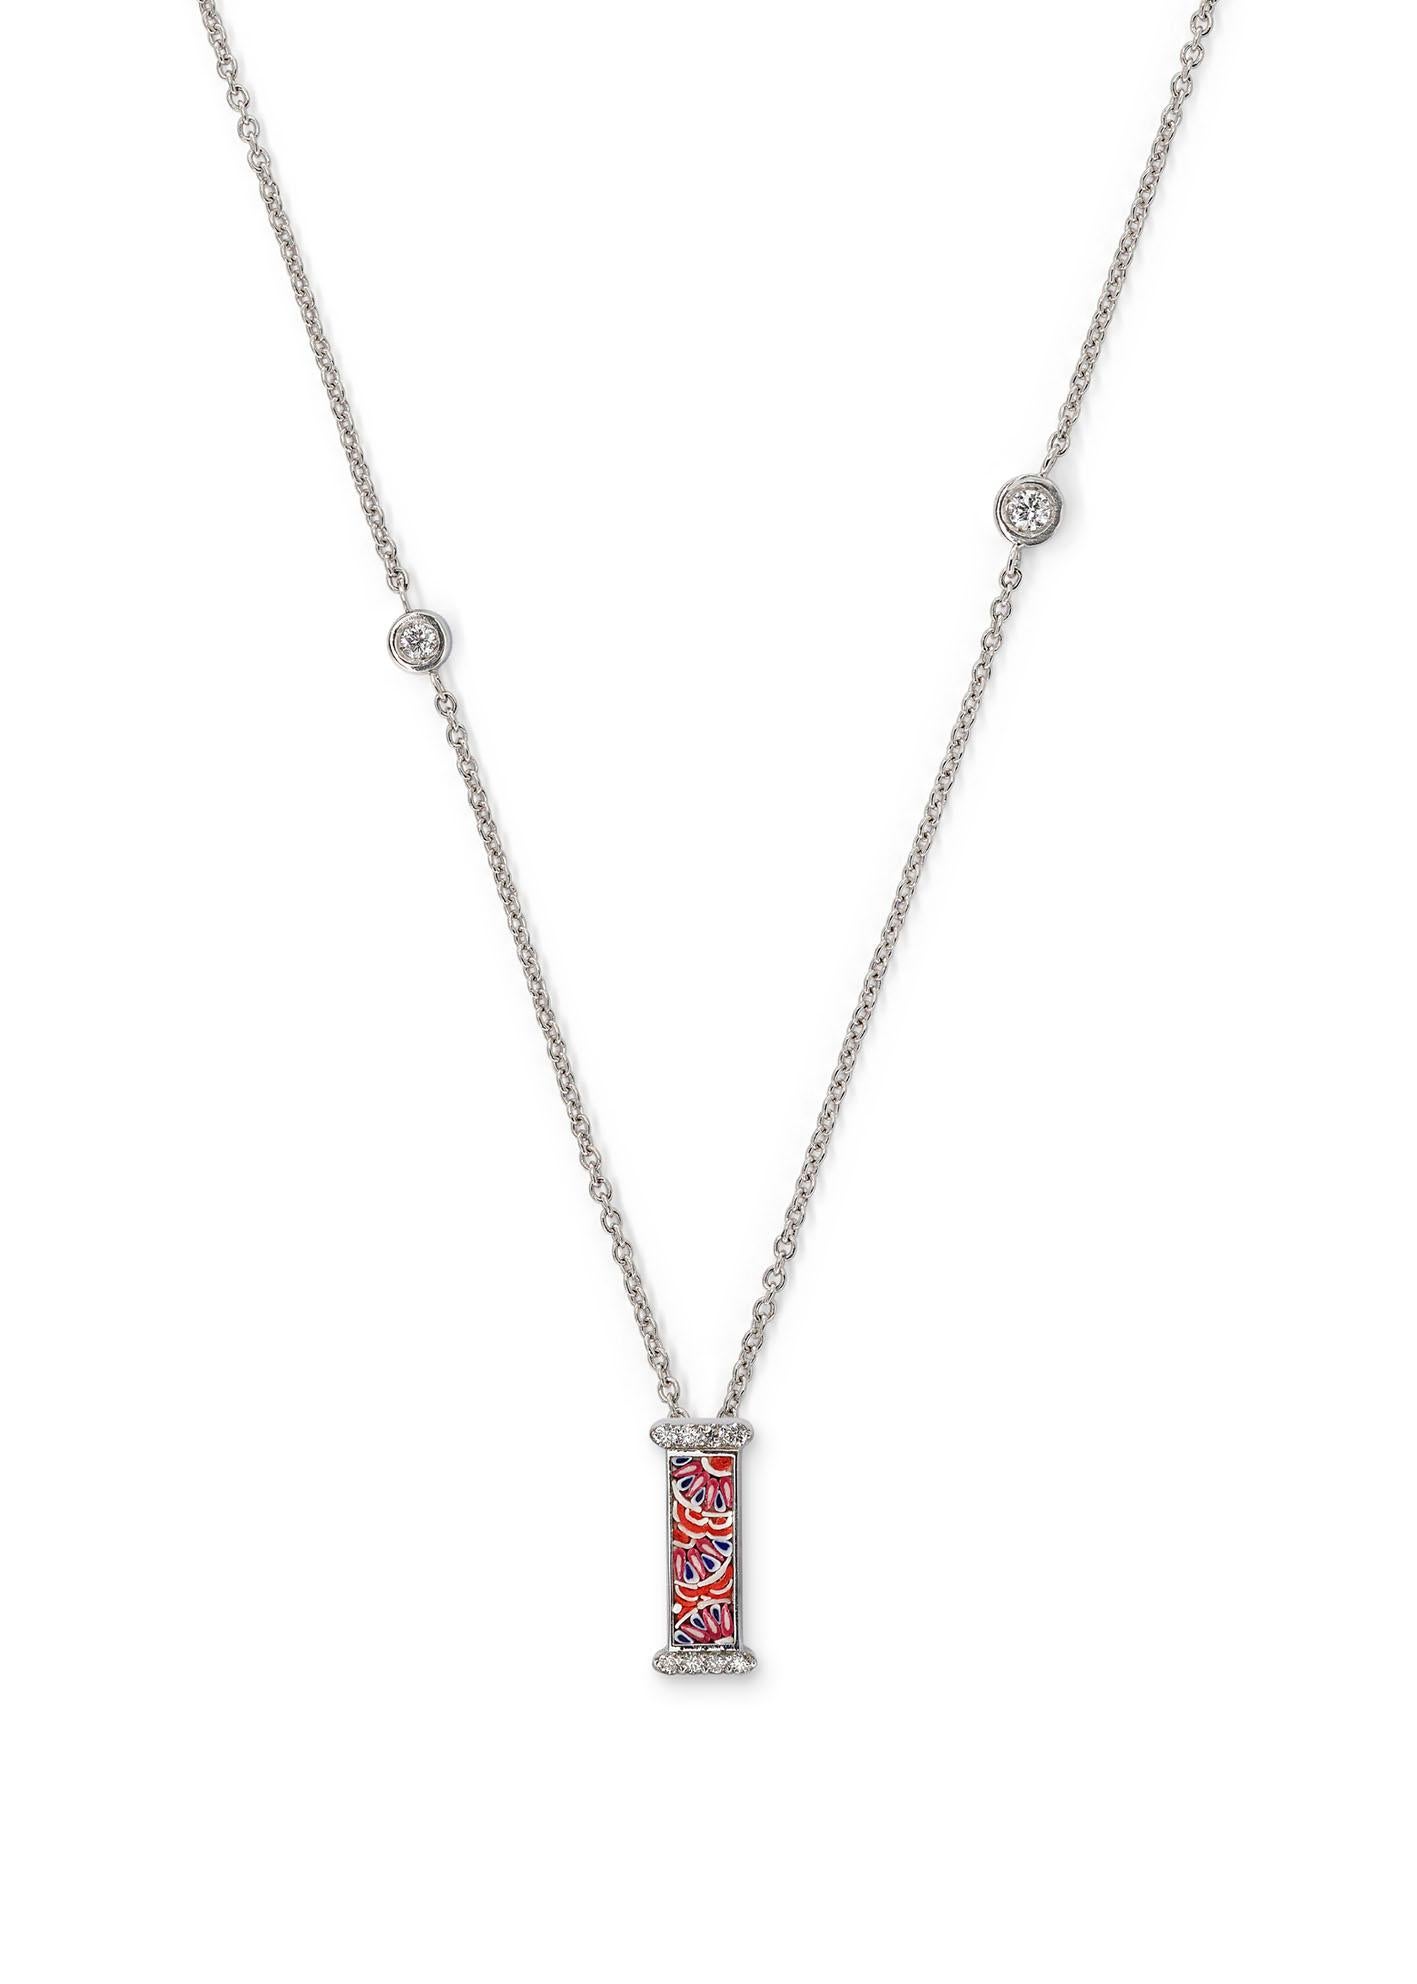 troy t necklace